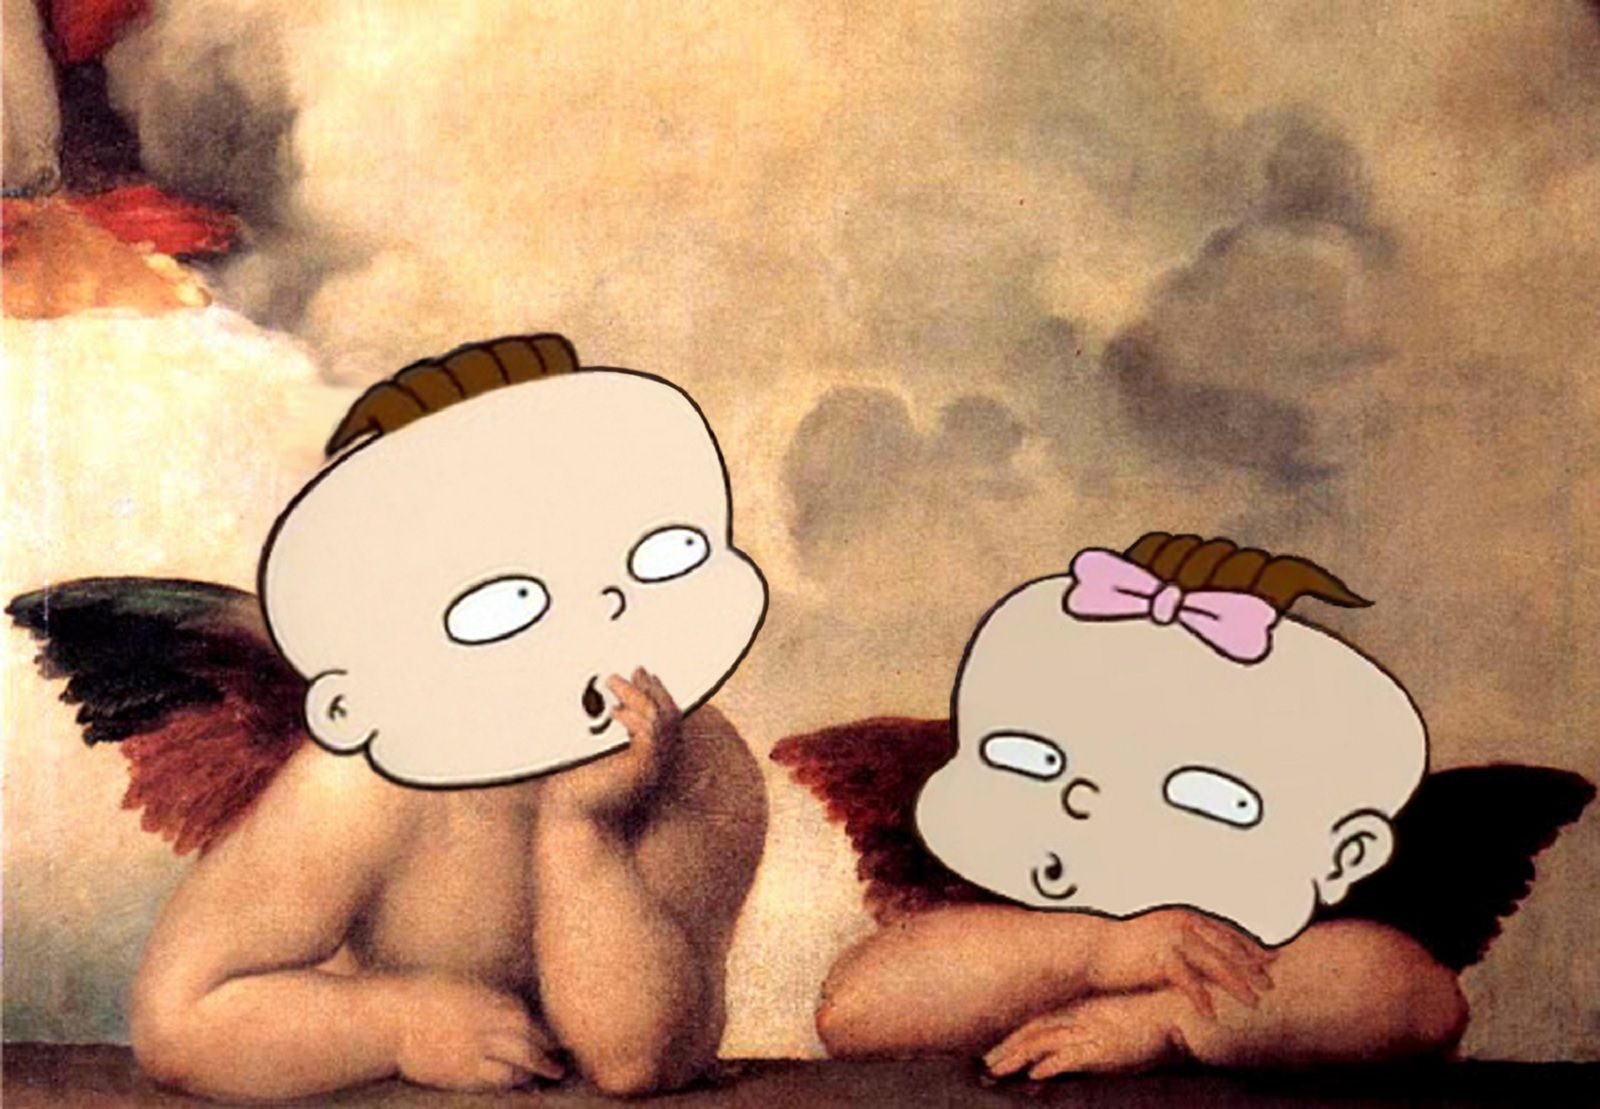 Amusing Images Of Cartoon Characters In Photoshopped Into Renaissance Paintings image 7